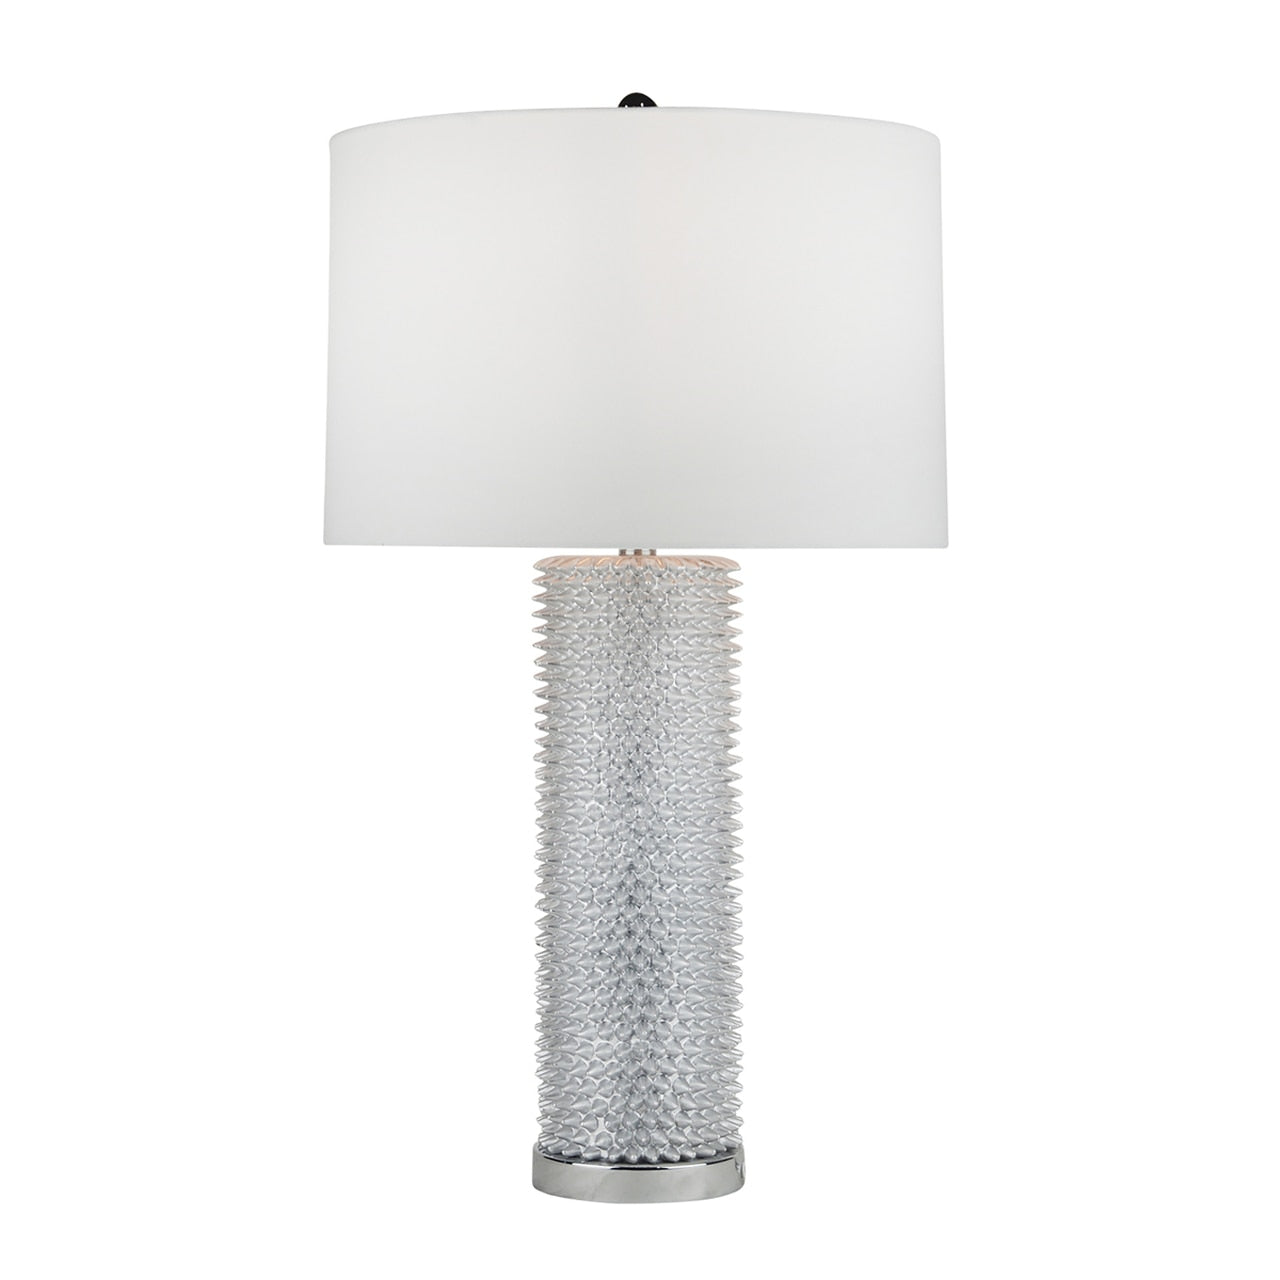 Resin Spiked Table Lamp - Silver